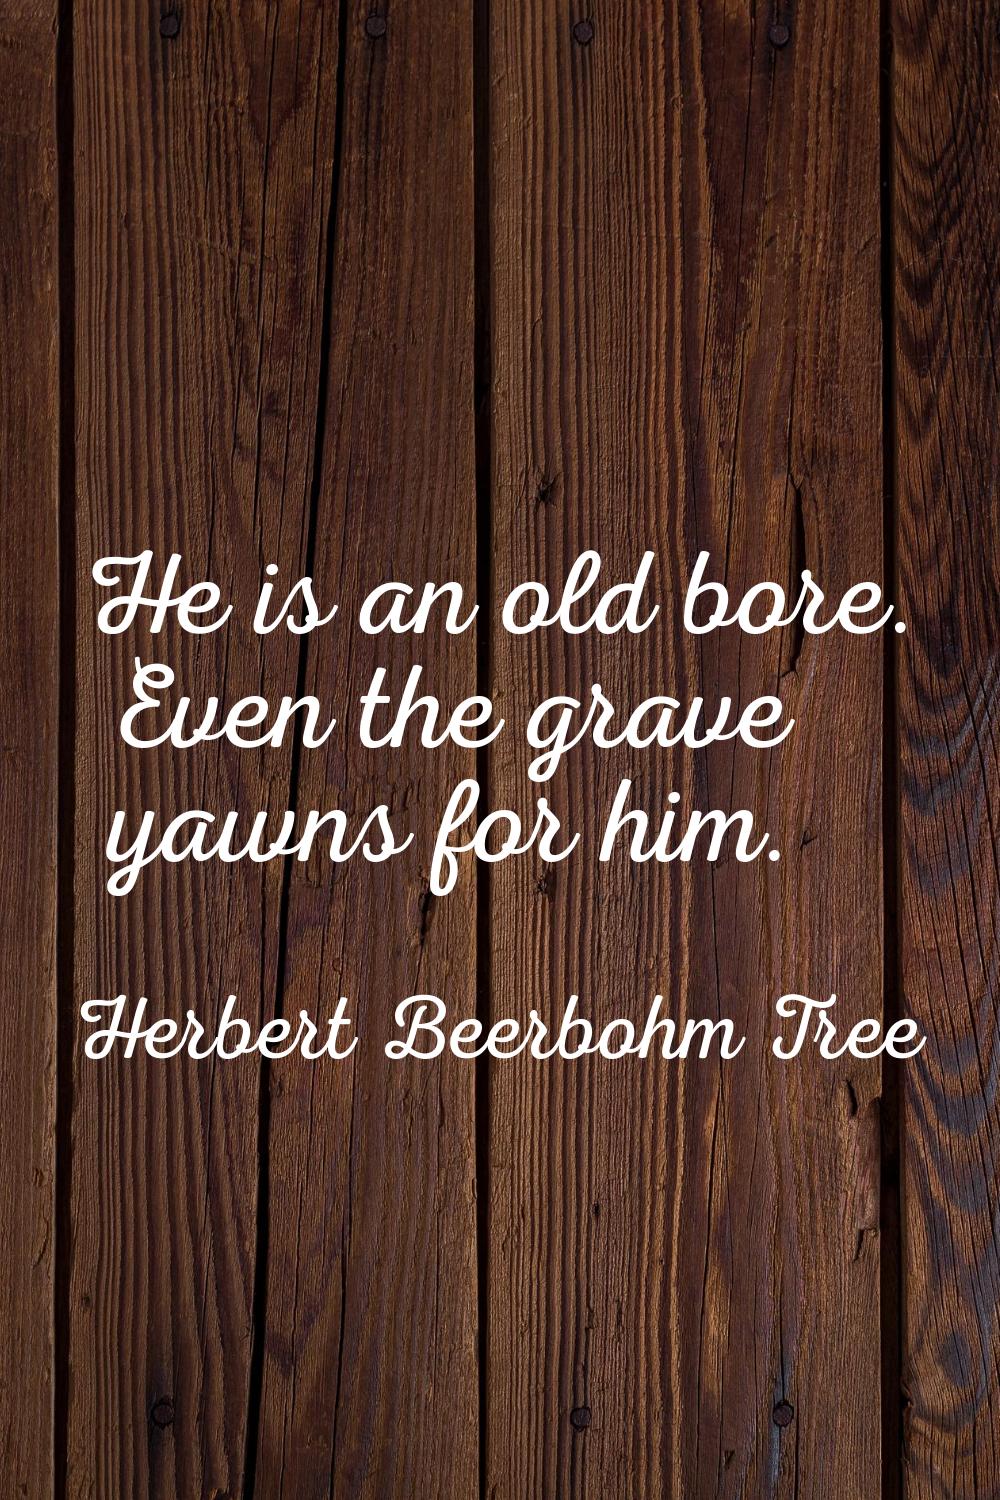 He is an old bore. Even the grave yawns for him.